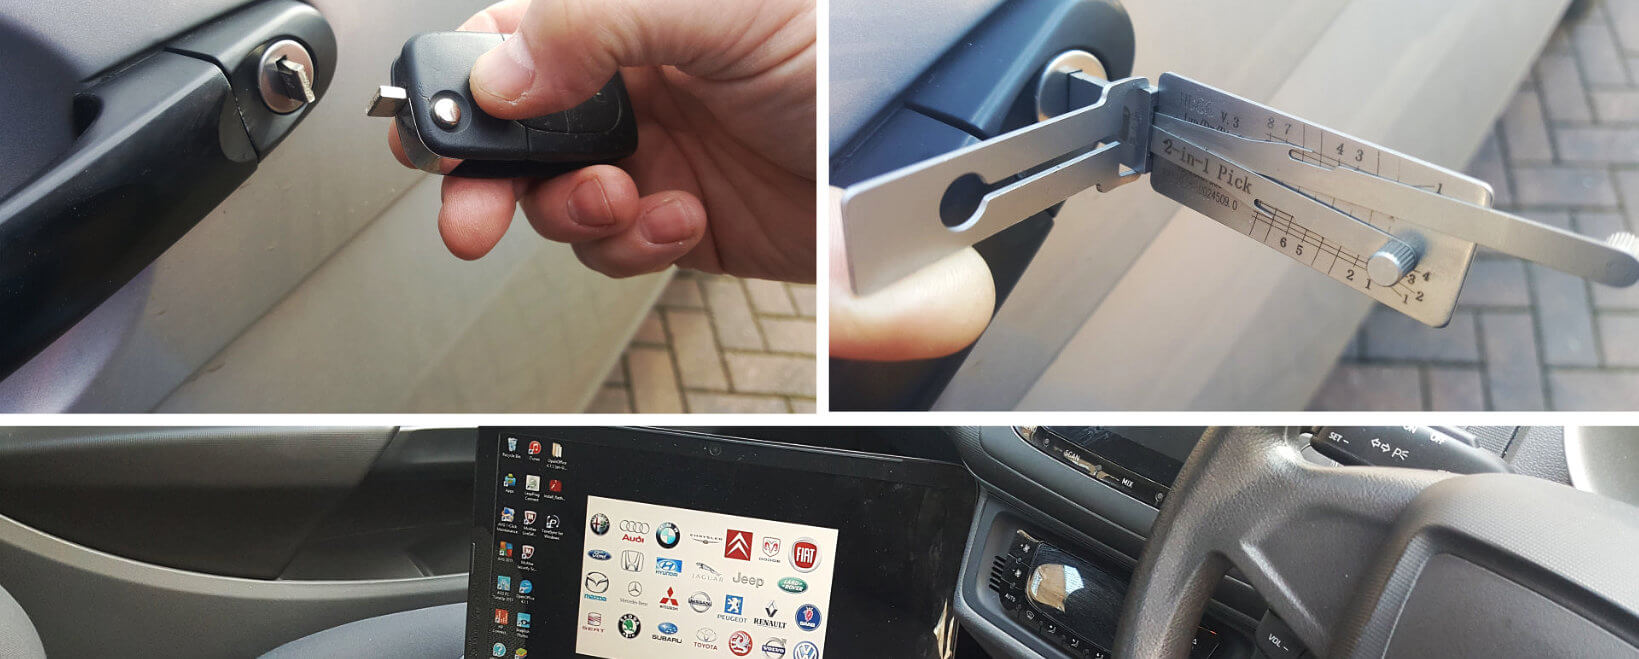 The car key experts - solutions for all your car key problems